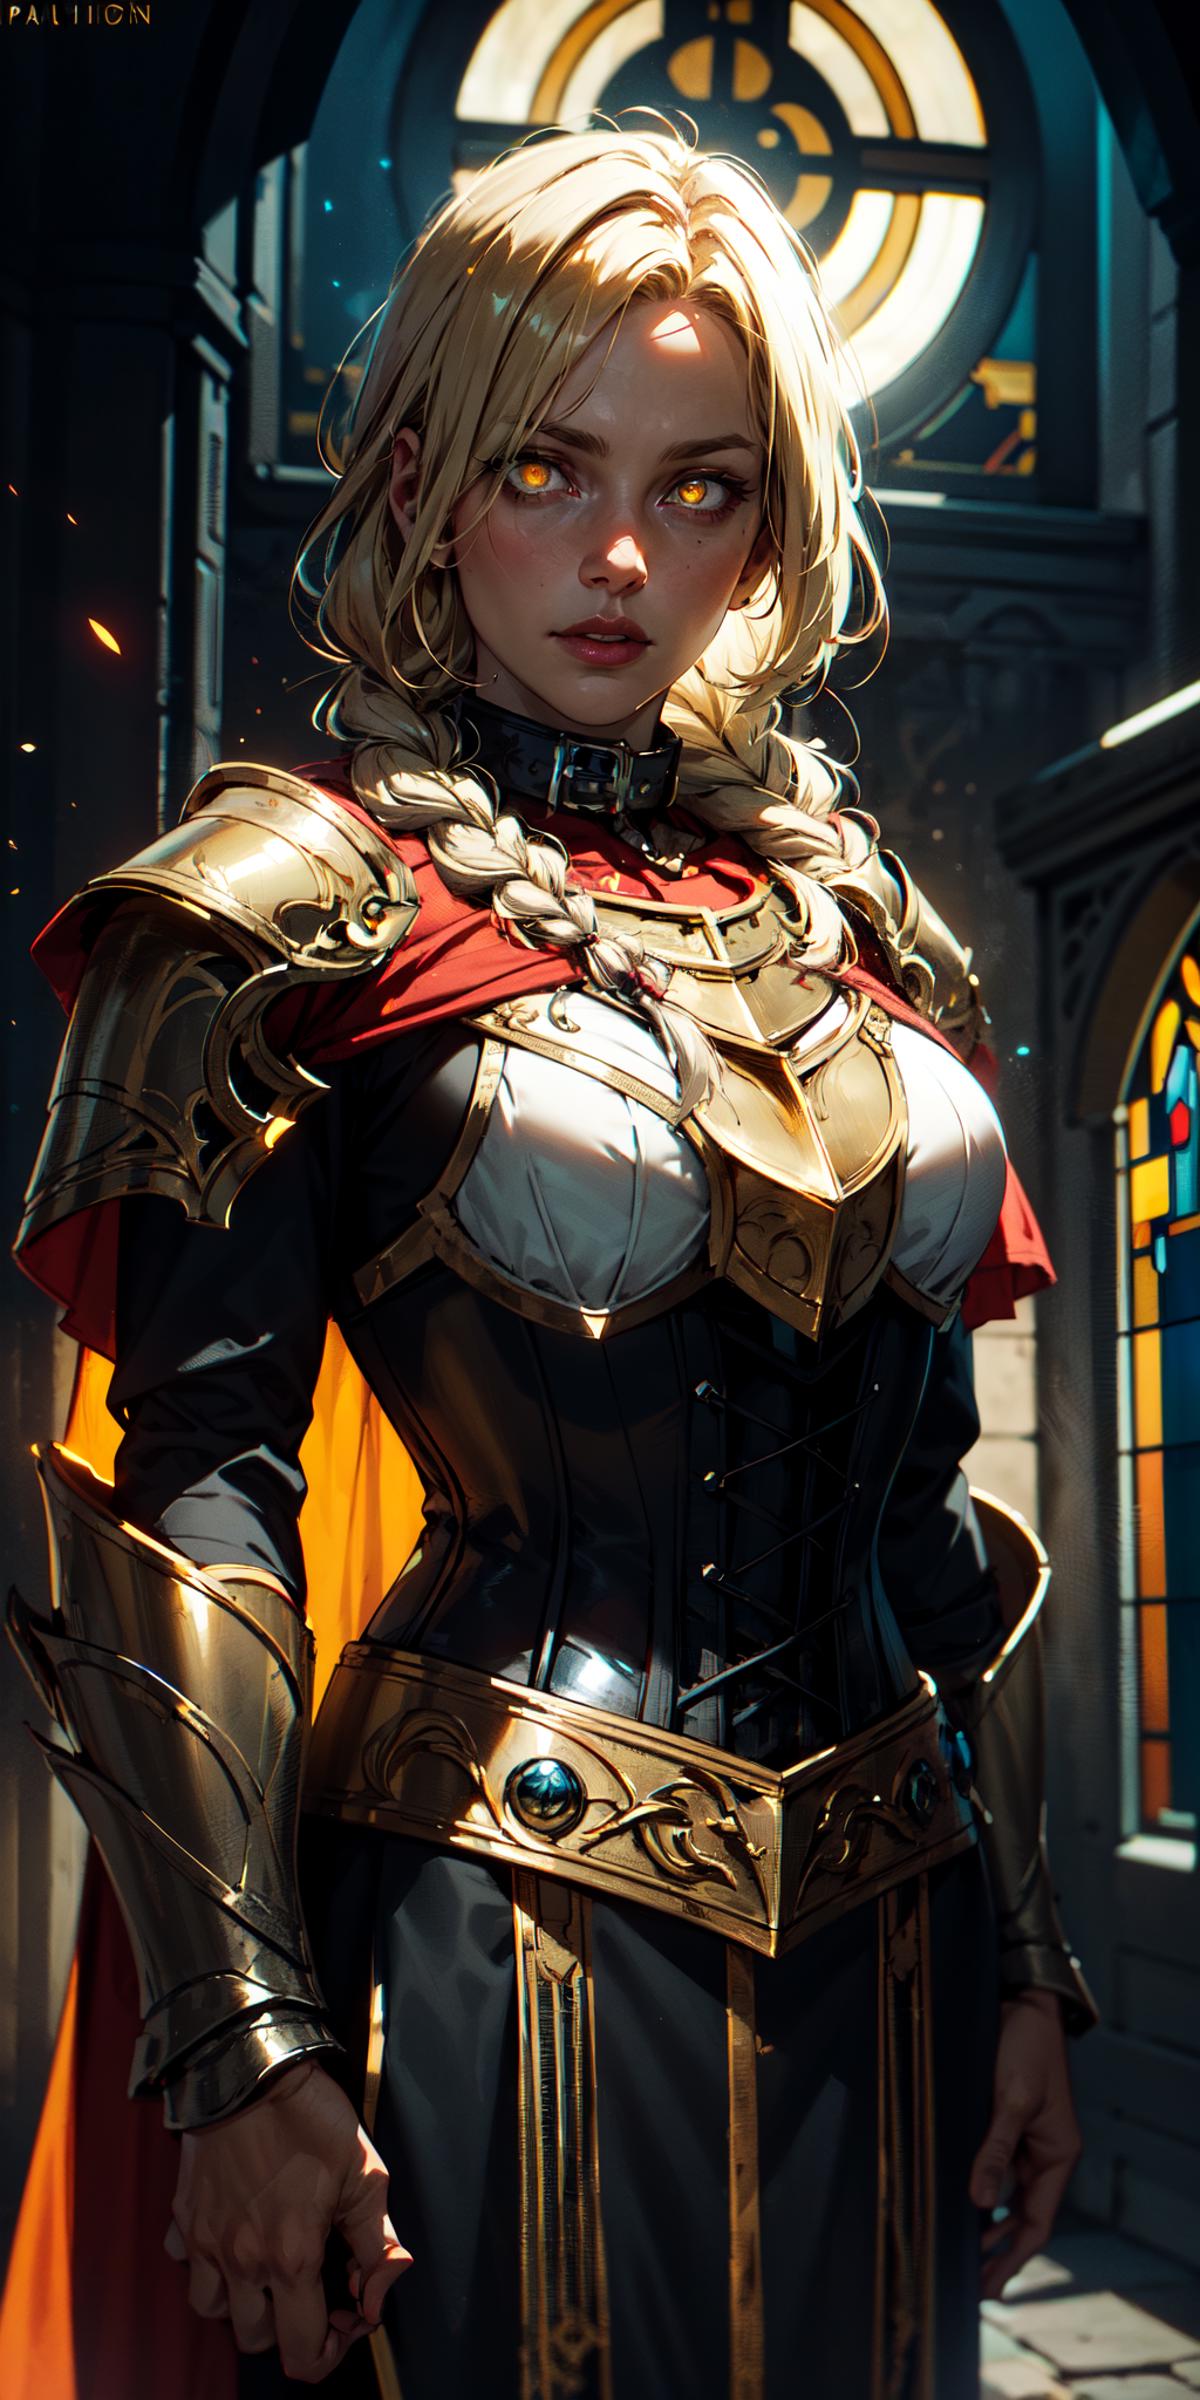 A digital art illustration of a woman wearing a black and gold armor, red cape, and white top.